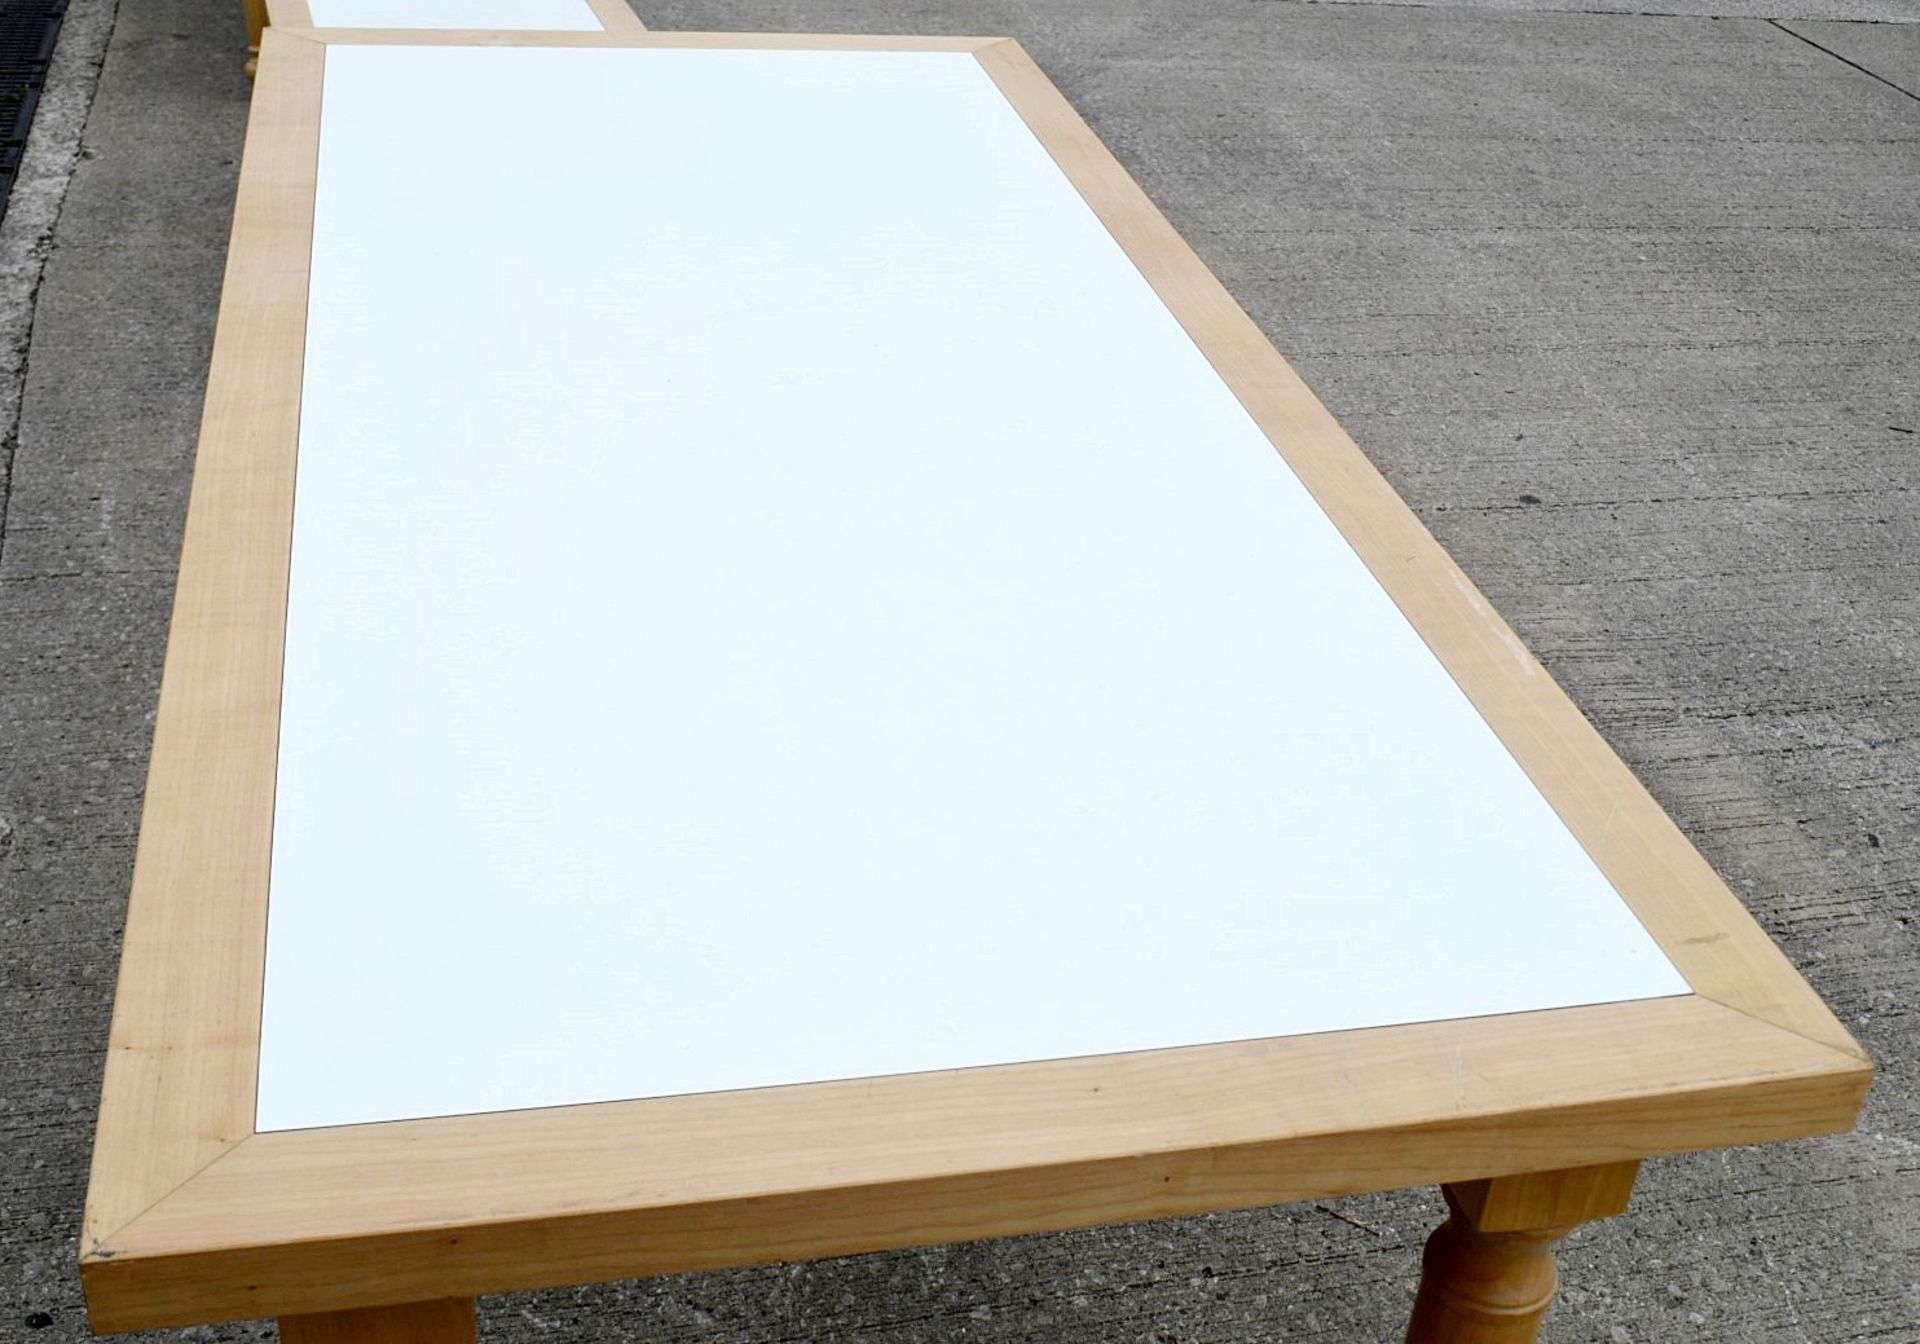 1 x Large Rectangular Event Table In Beech - Features Attractive Turned Legs And A White Inlay - Image 2 of 3